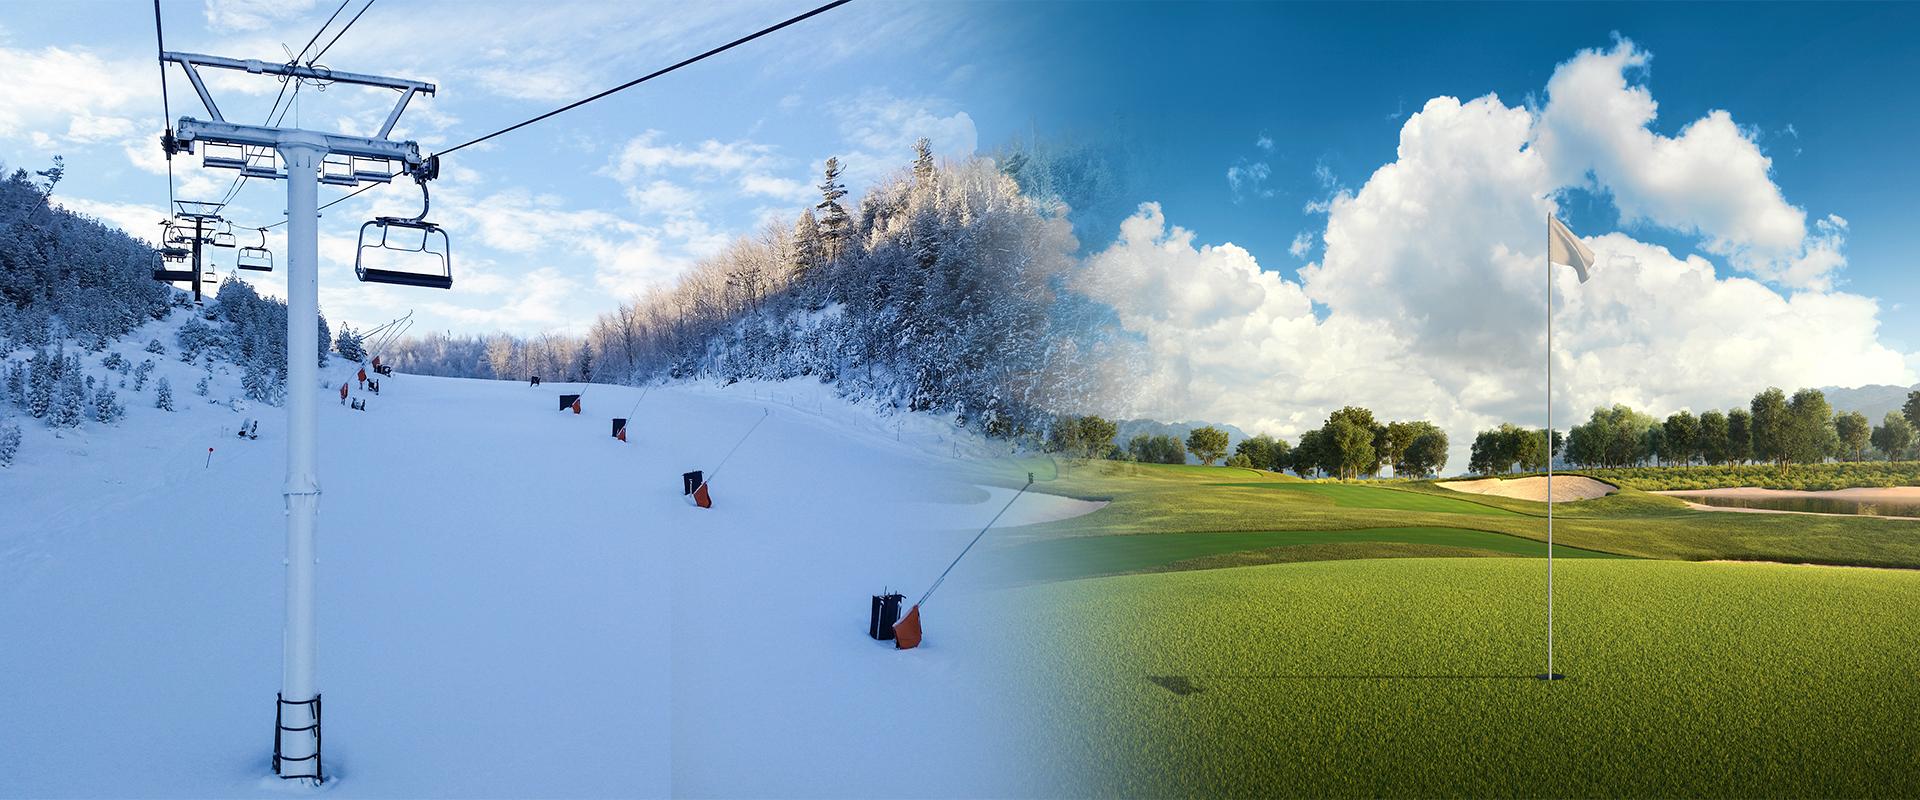 Ski hill and golf course blended together